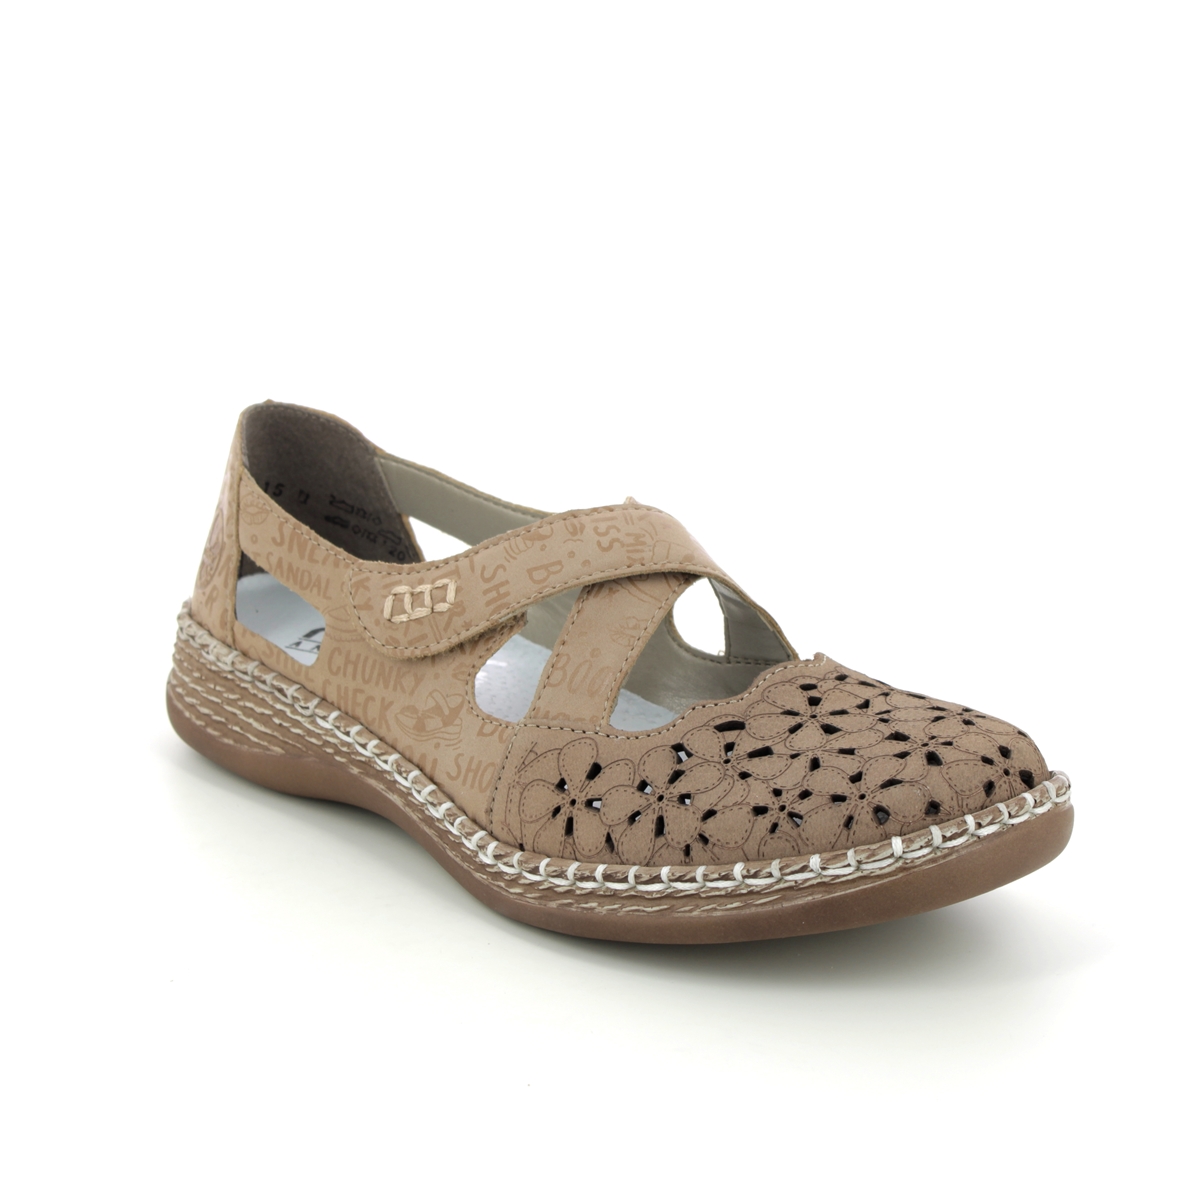 Rieker 464H4-62 Light Taupe Leather Womens Mary Jane Shoes in a Plain Leather in Size 41